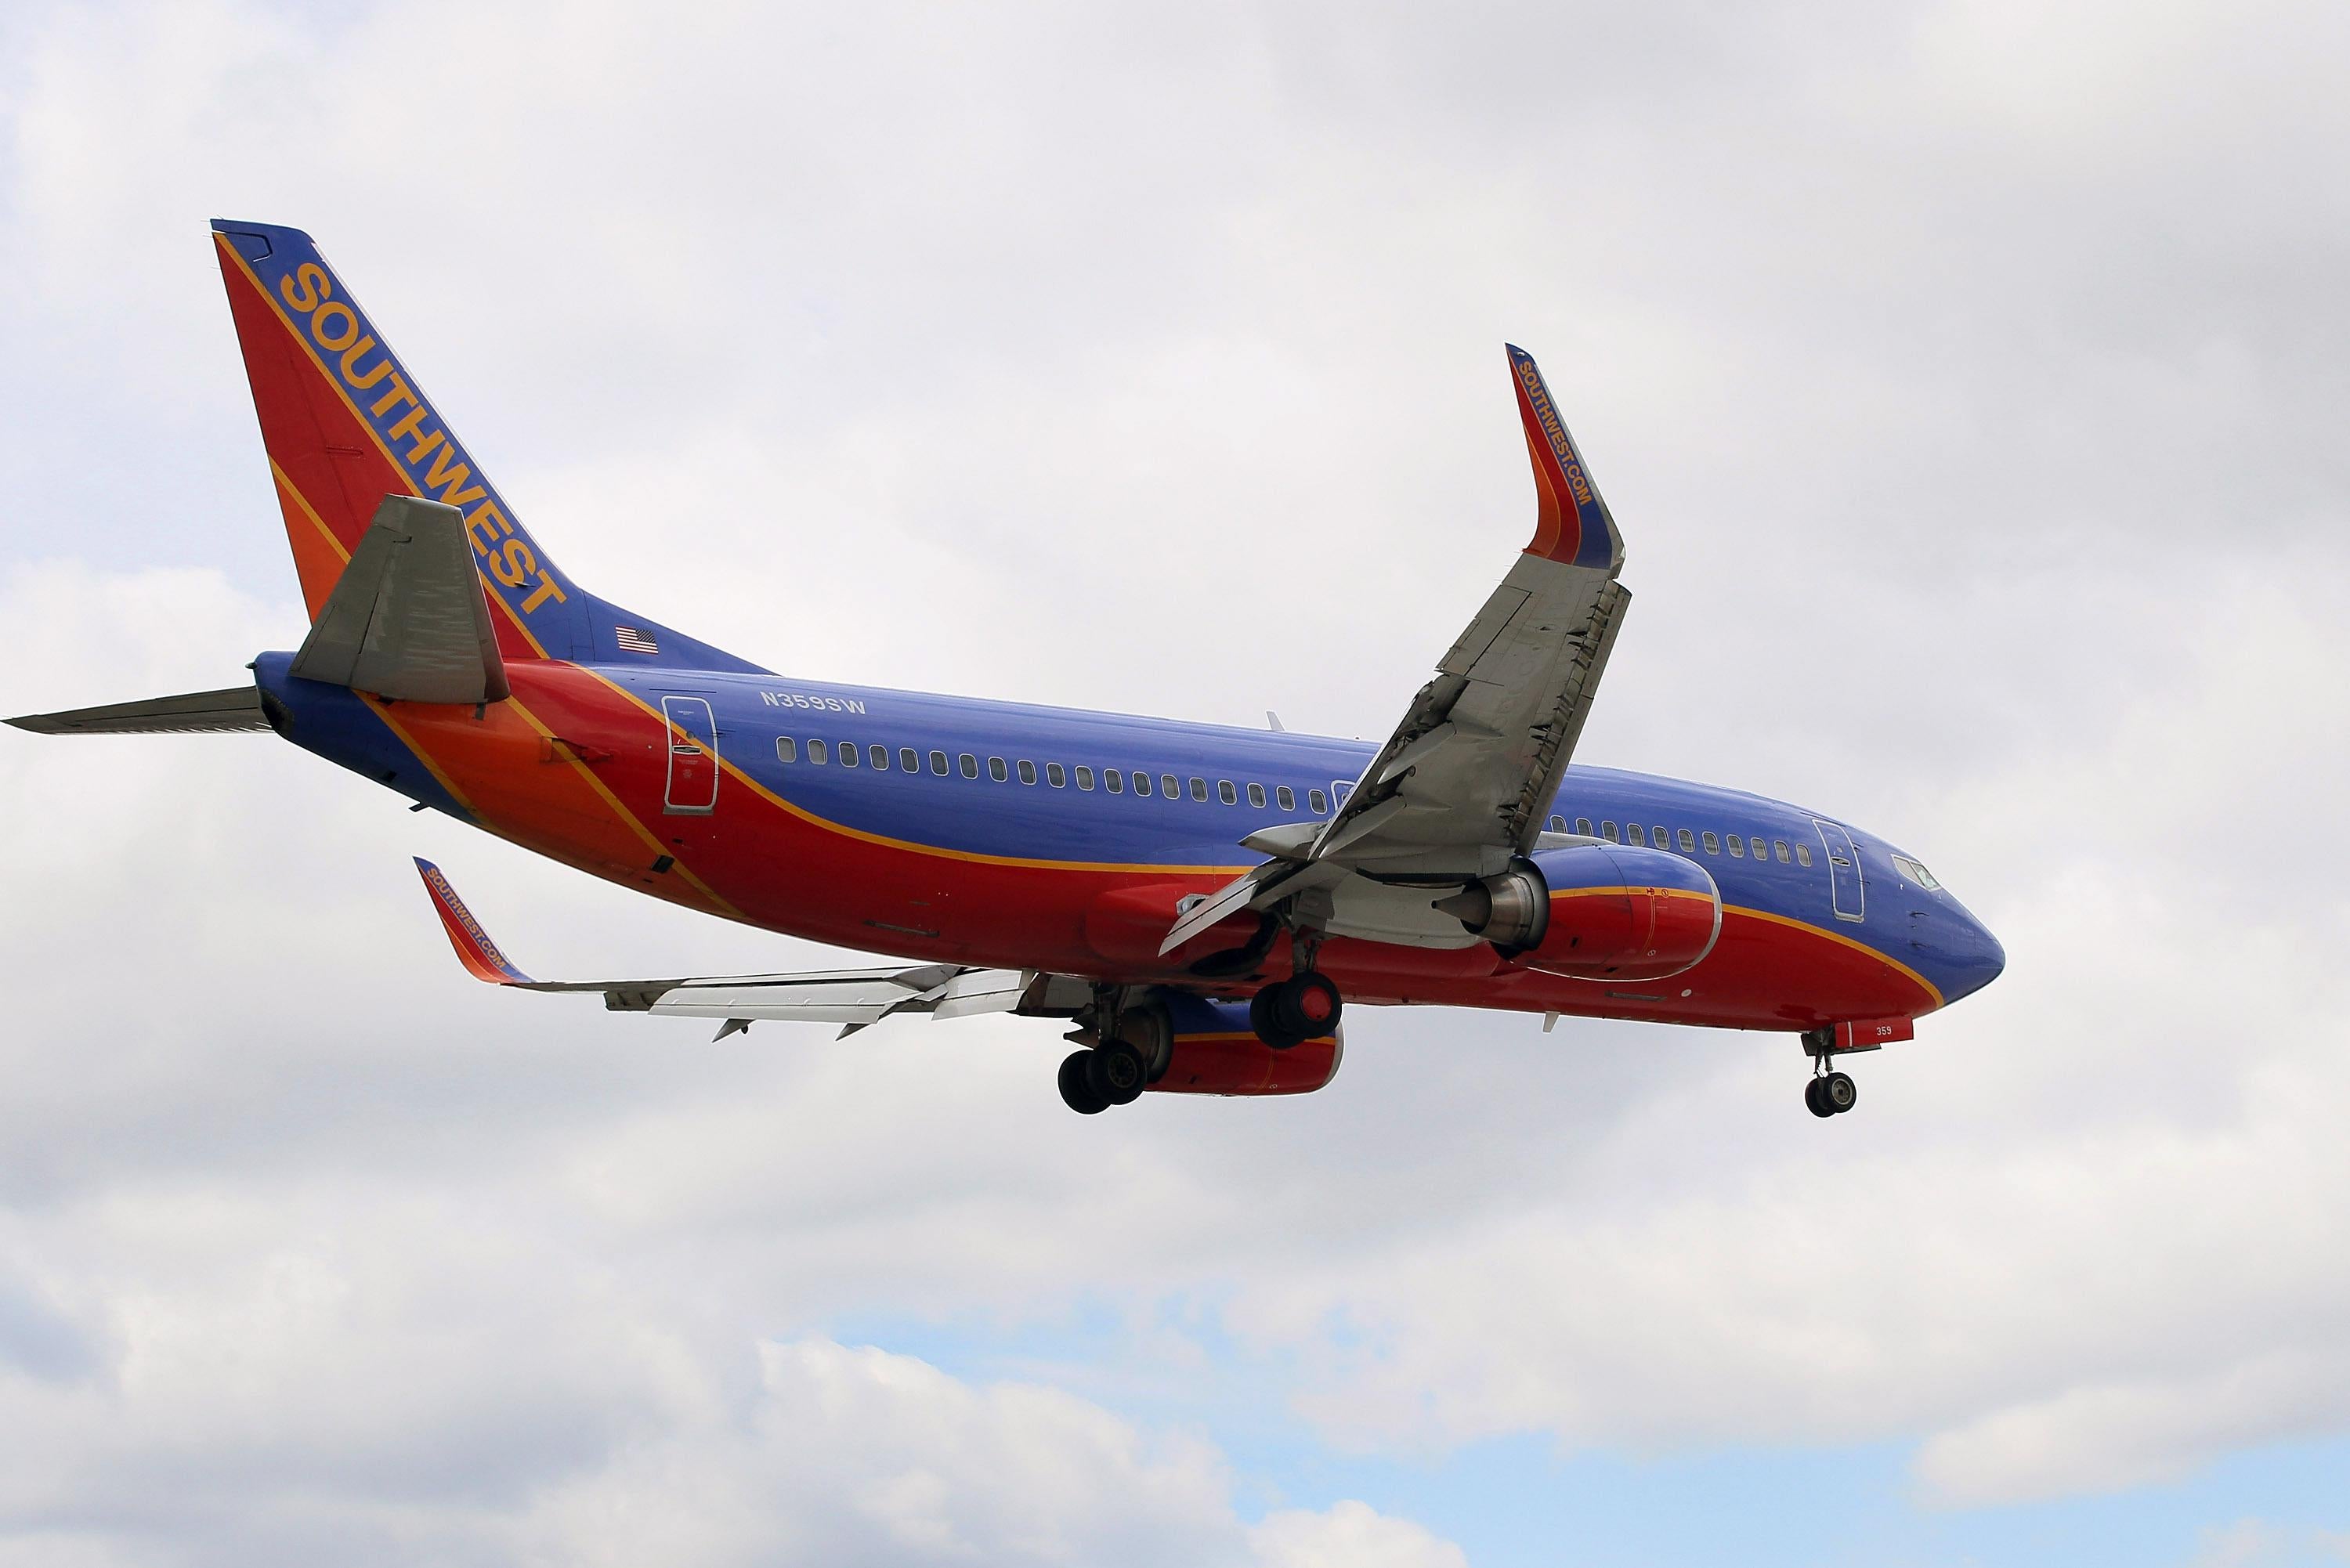 southwest airlines check in online not working